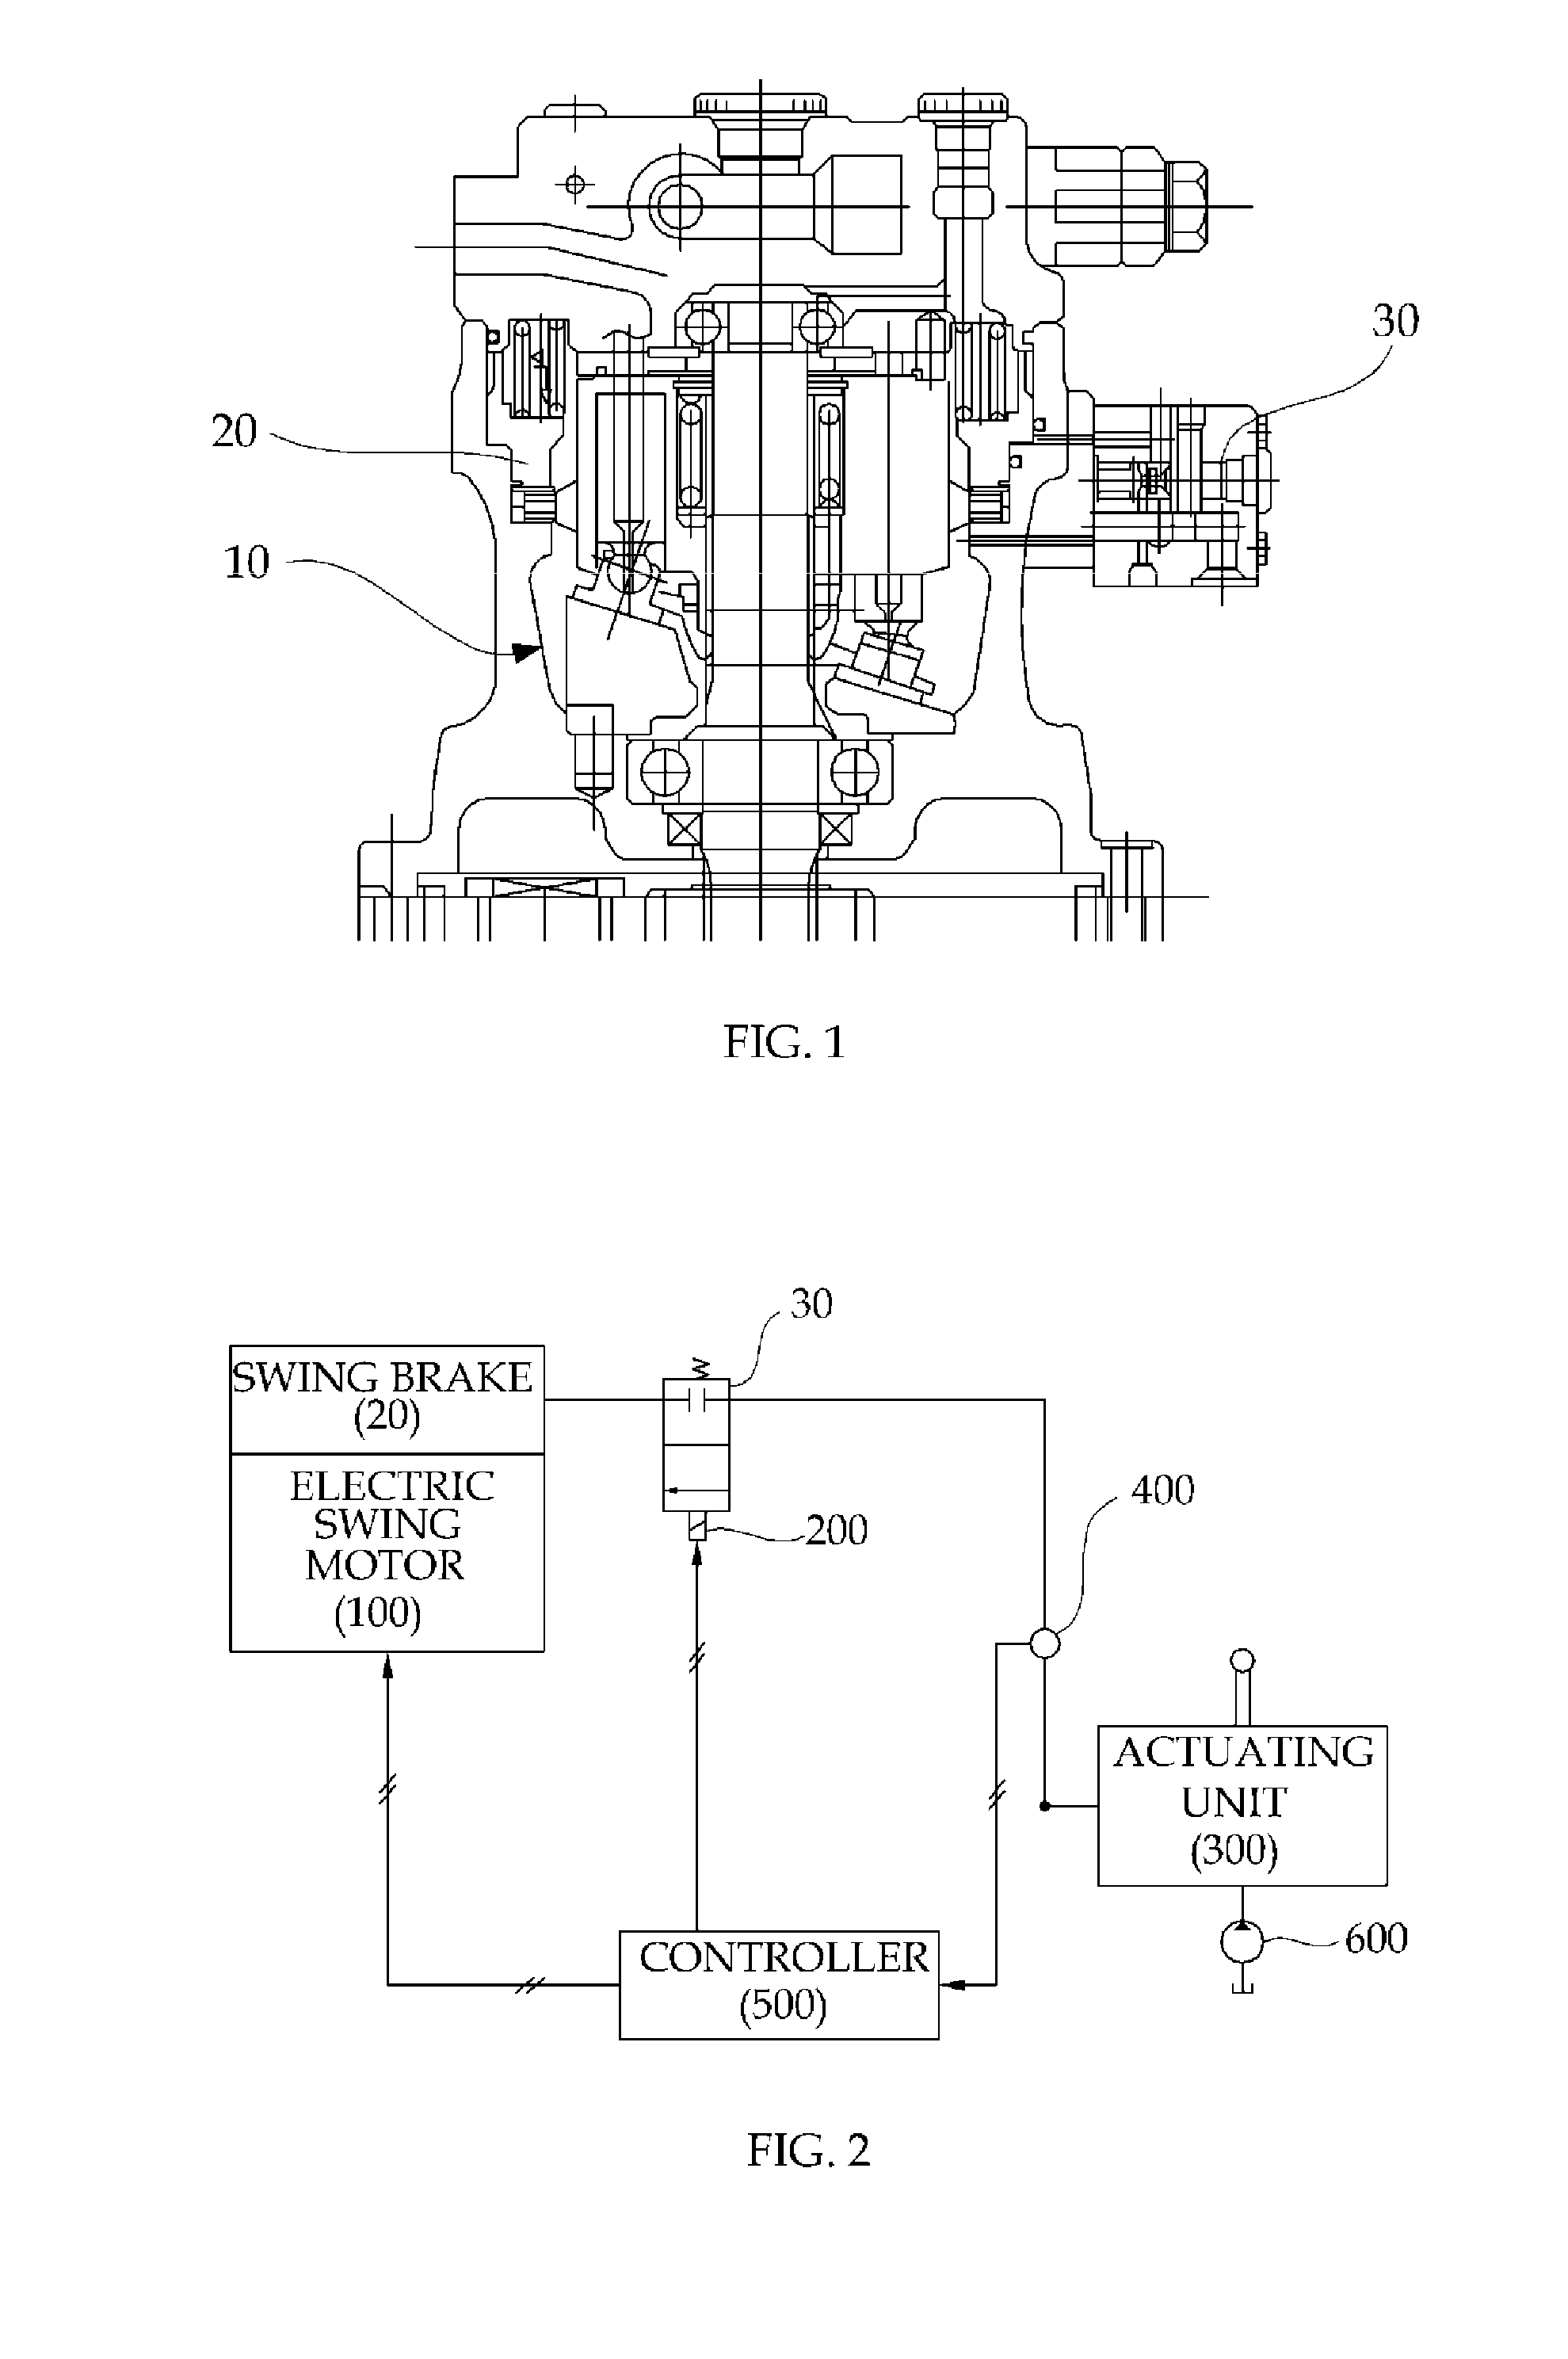 Swing brake control apparatus for construction machinery